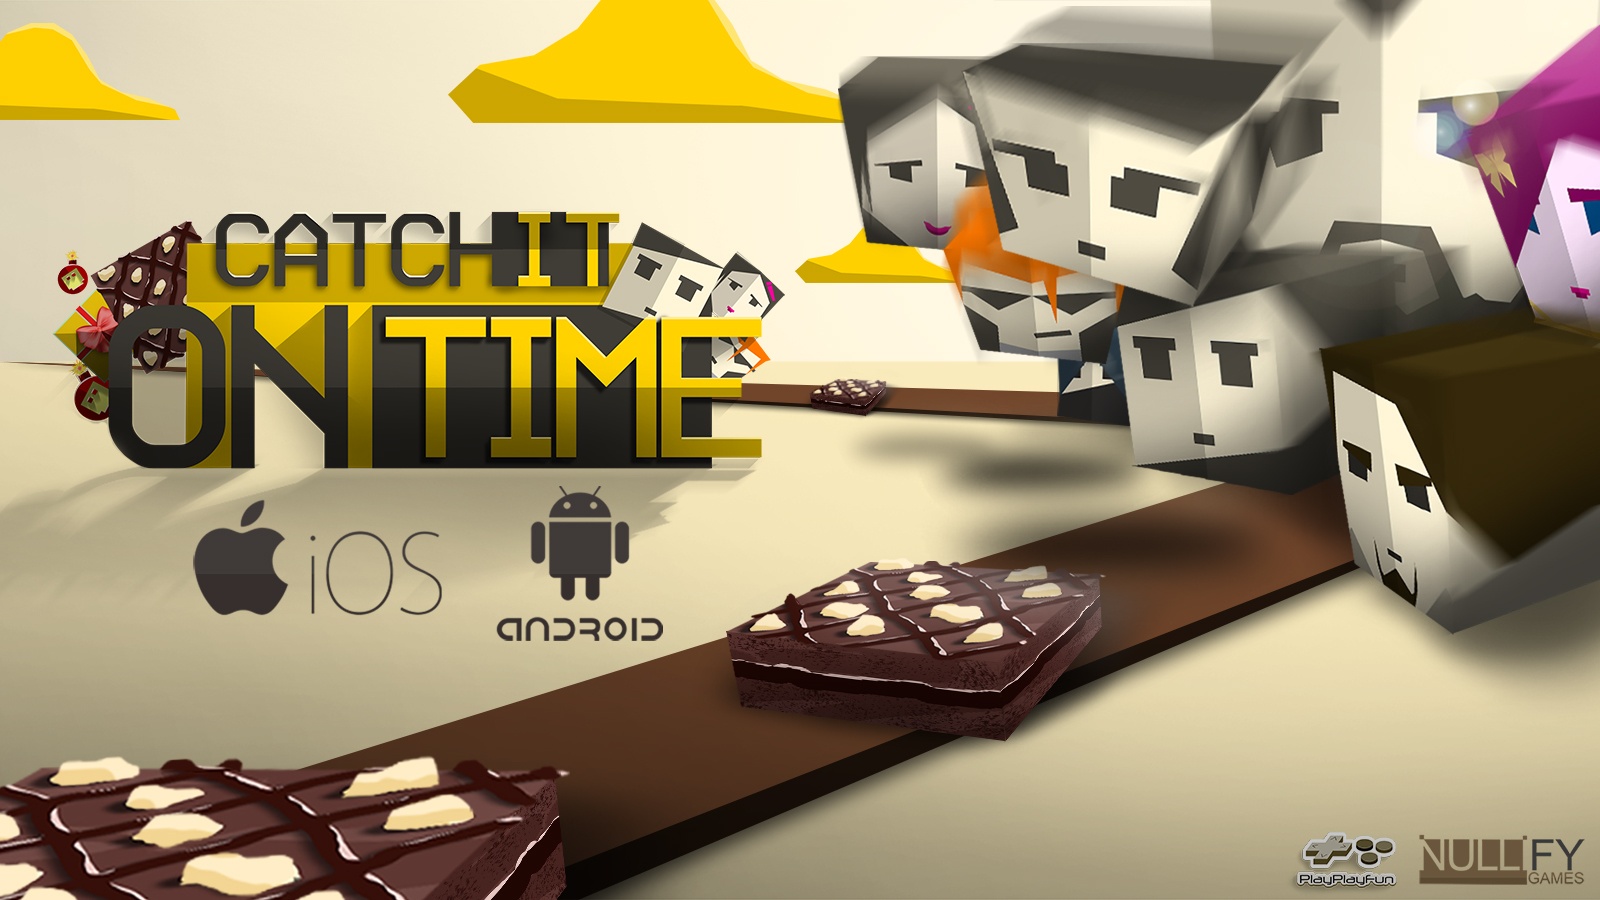 Catch It on Time Is about the Deliciousness of Brownies